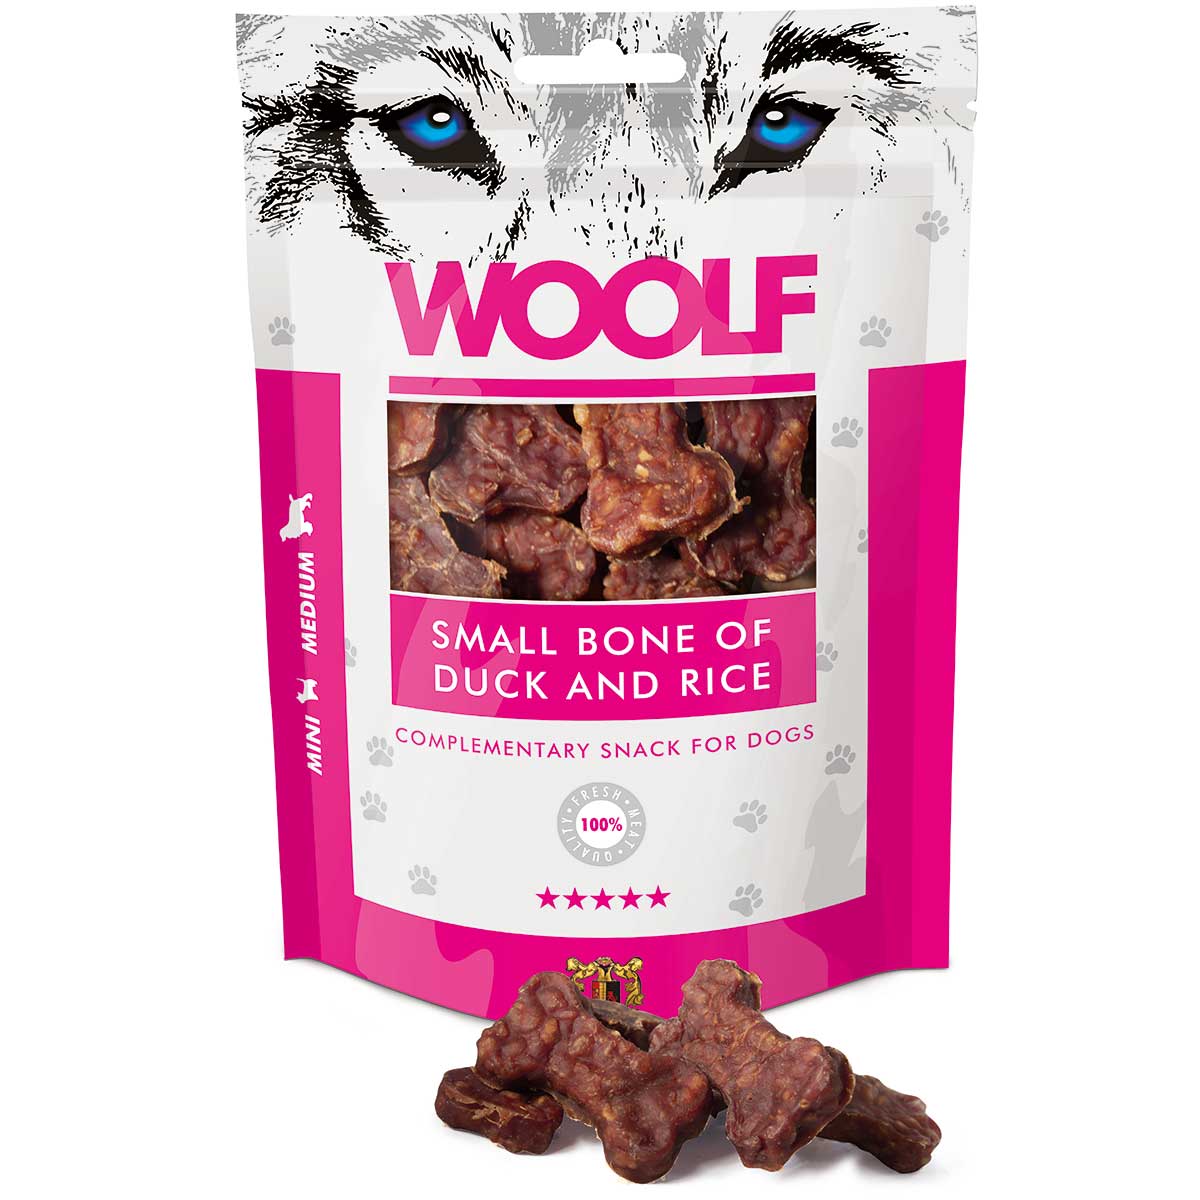 Woolf Dog treat small bones with duck & rice